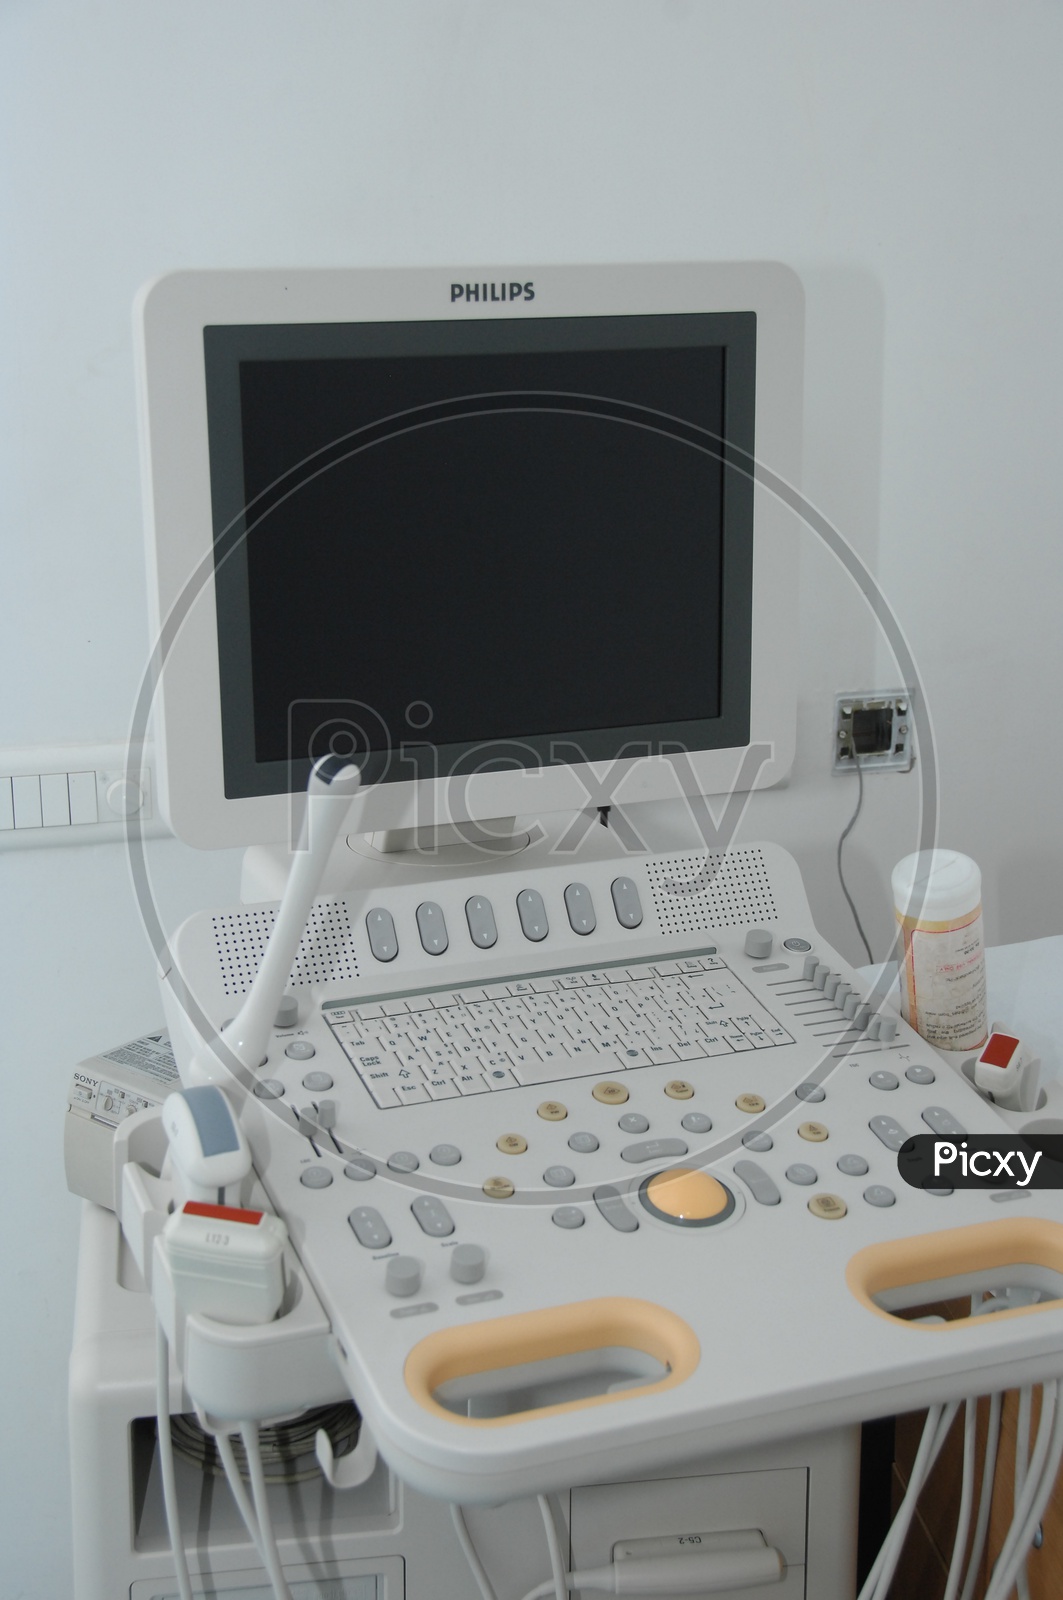 equipment and medical devices in Hospital